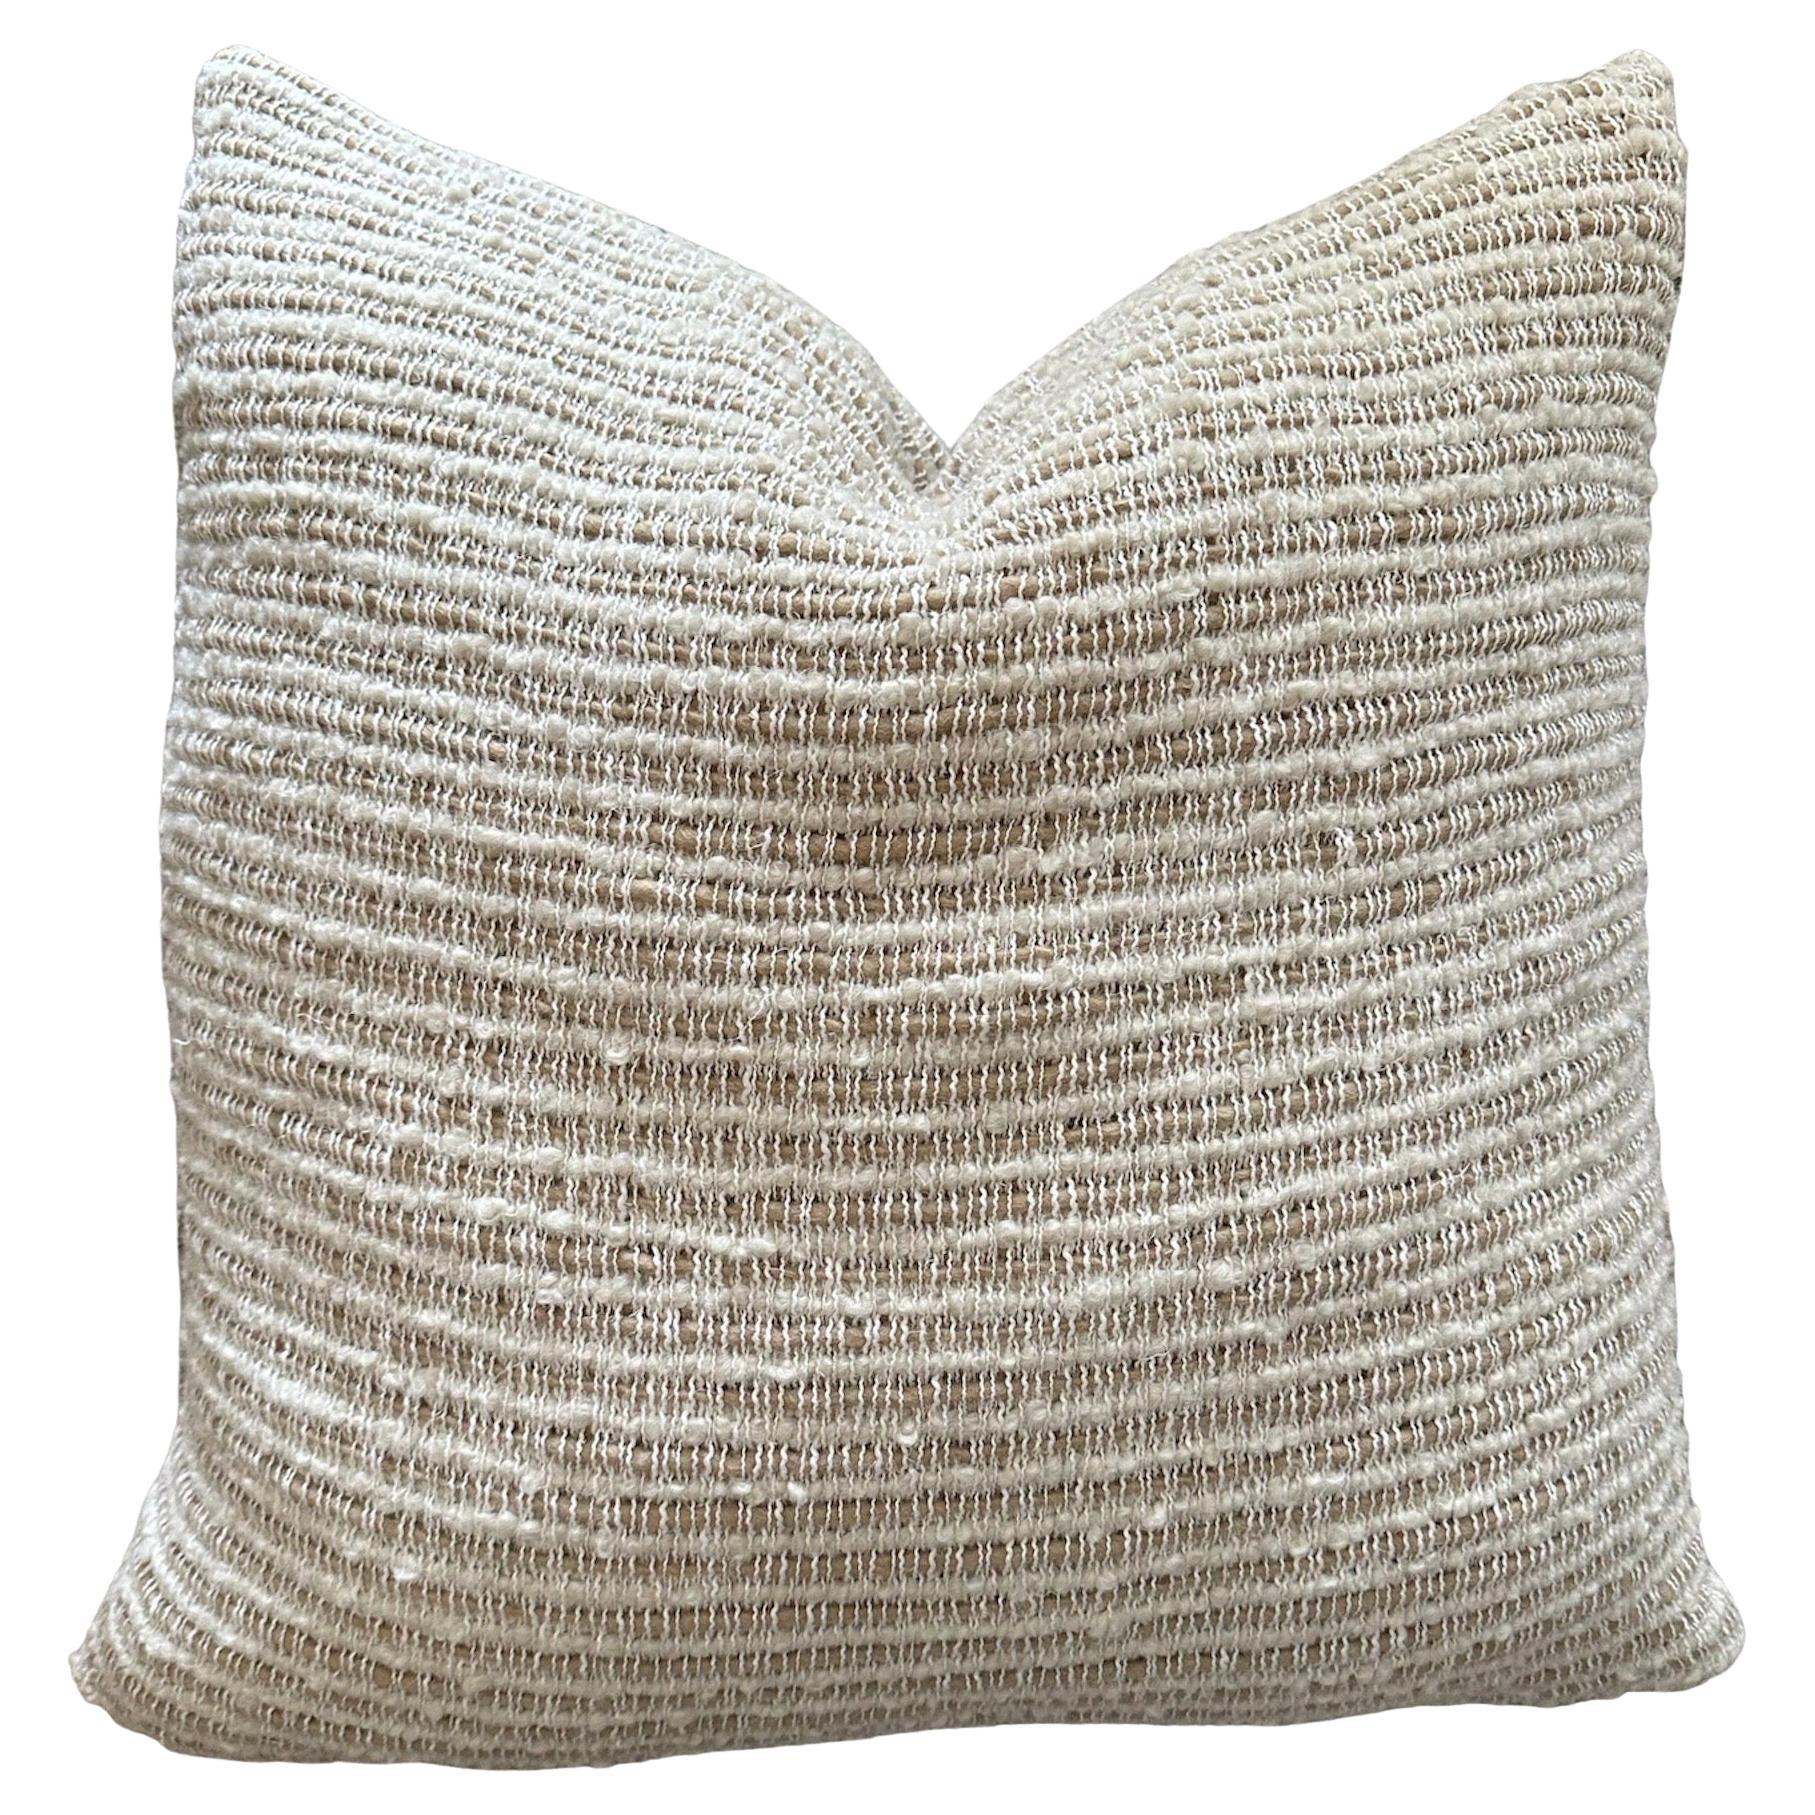 Wool and Linen Accent Pillow with Down Feather Insert